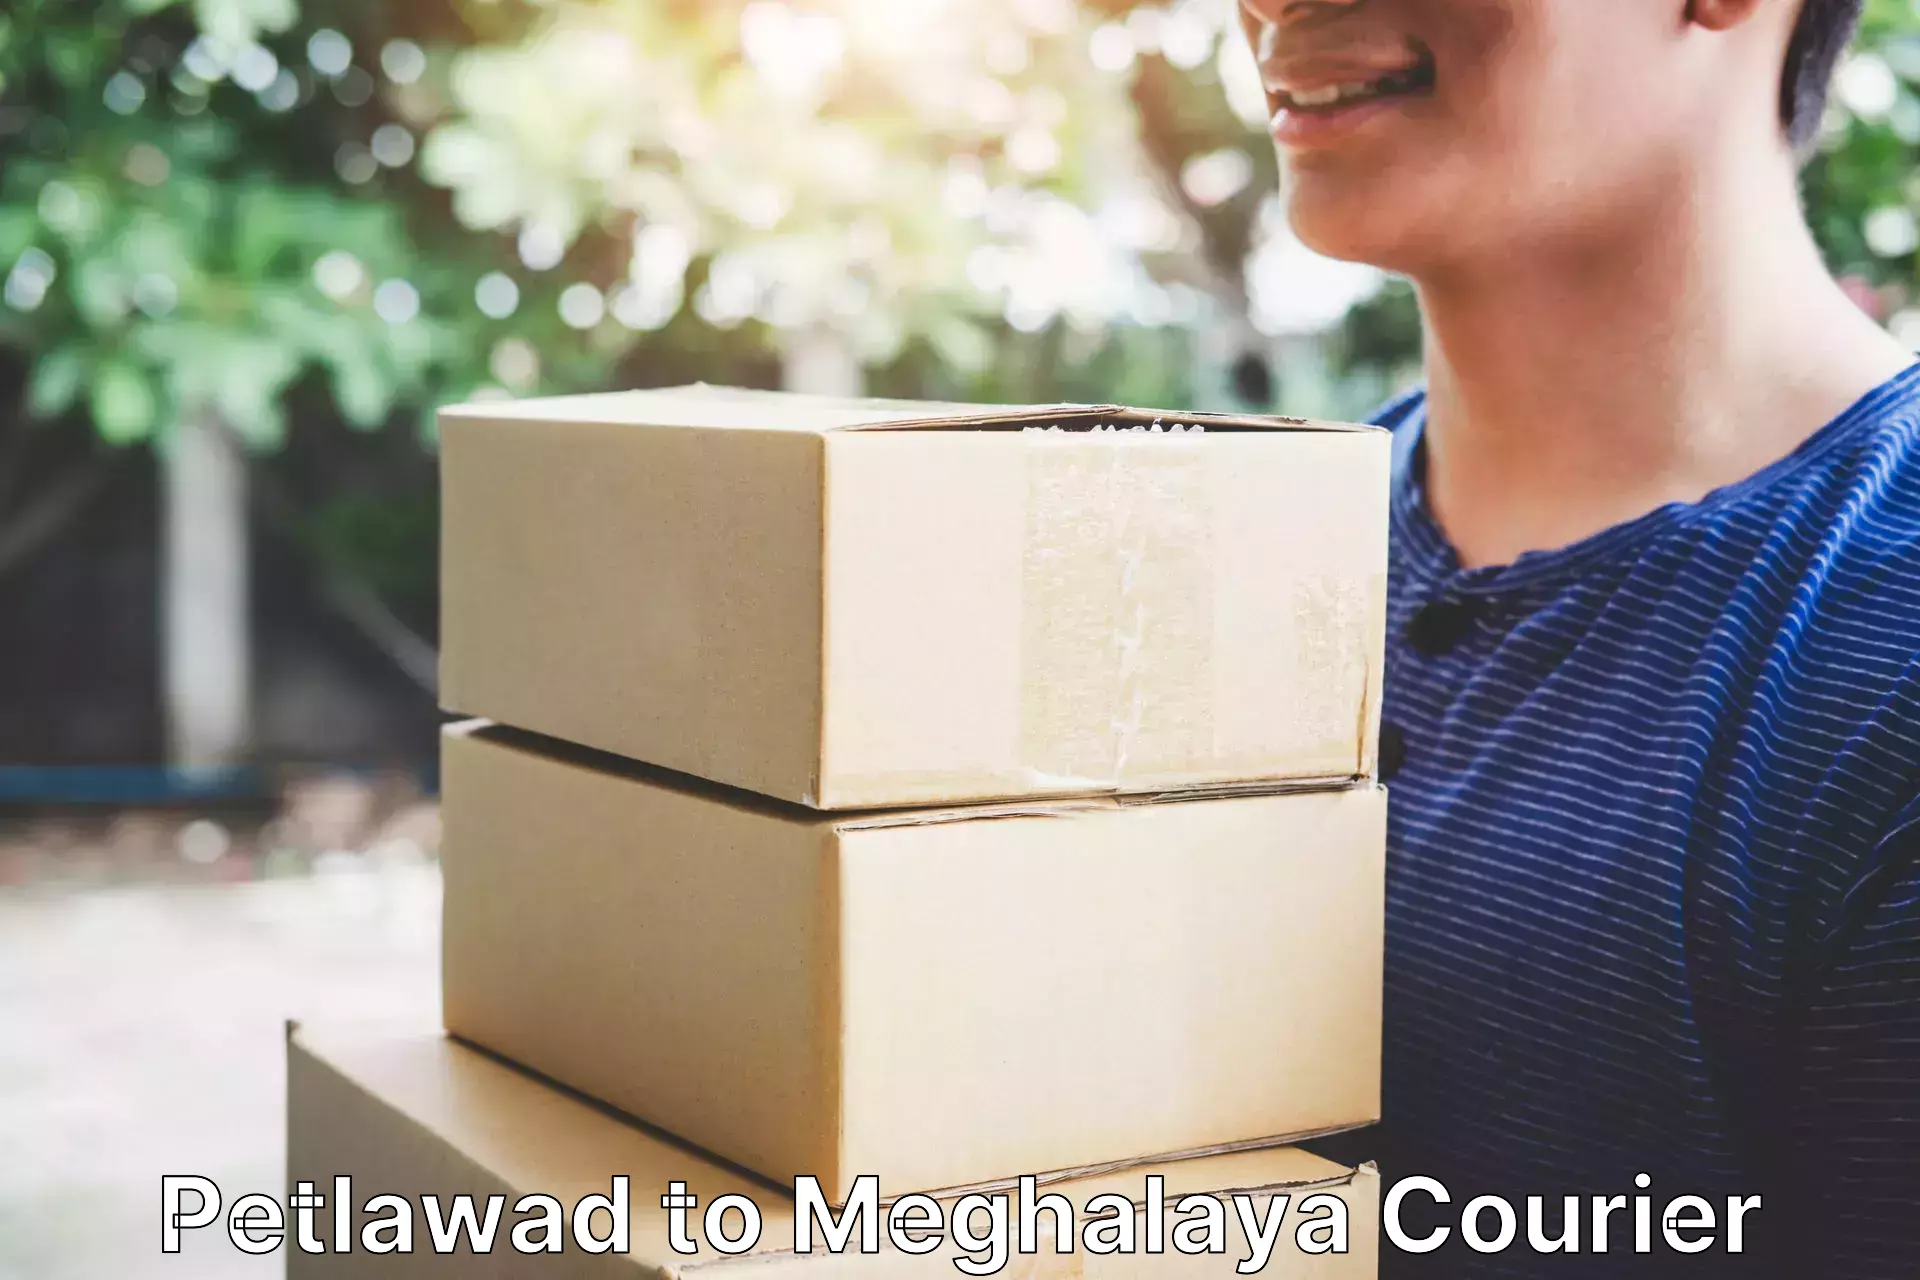 Same-day delivery options in Petlawad to Meghalaya